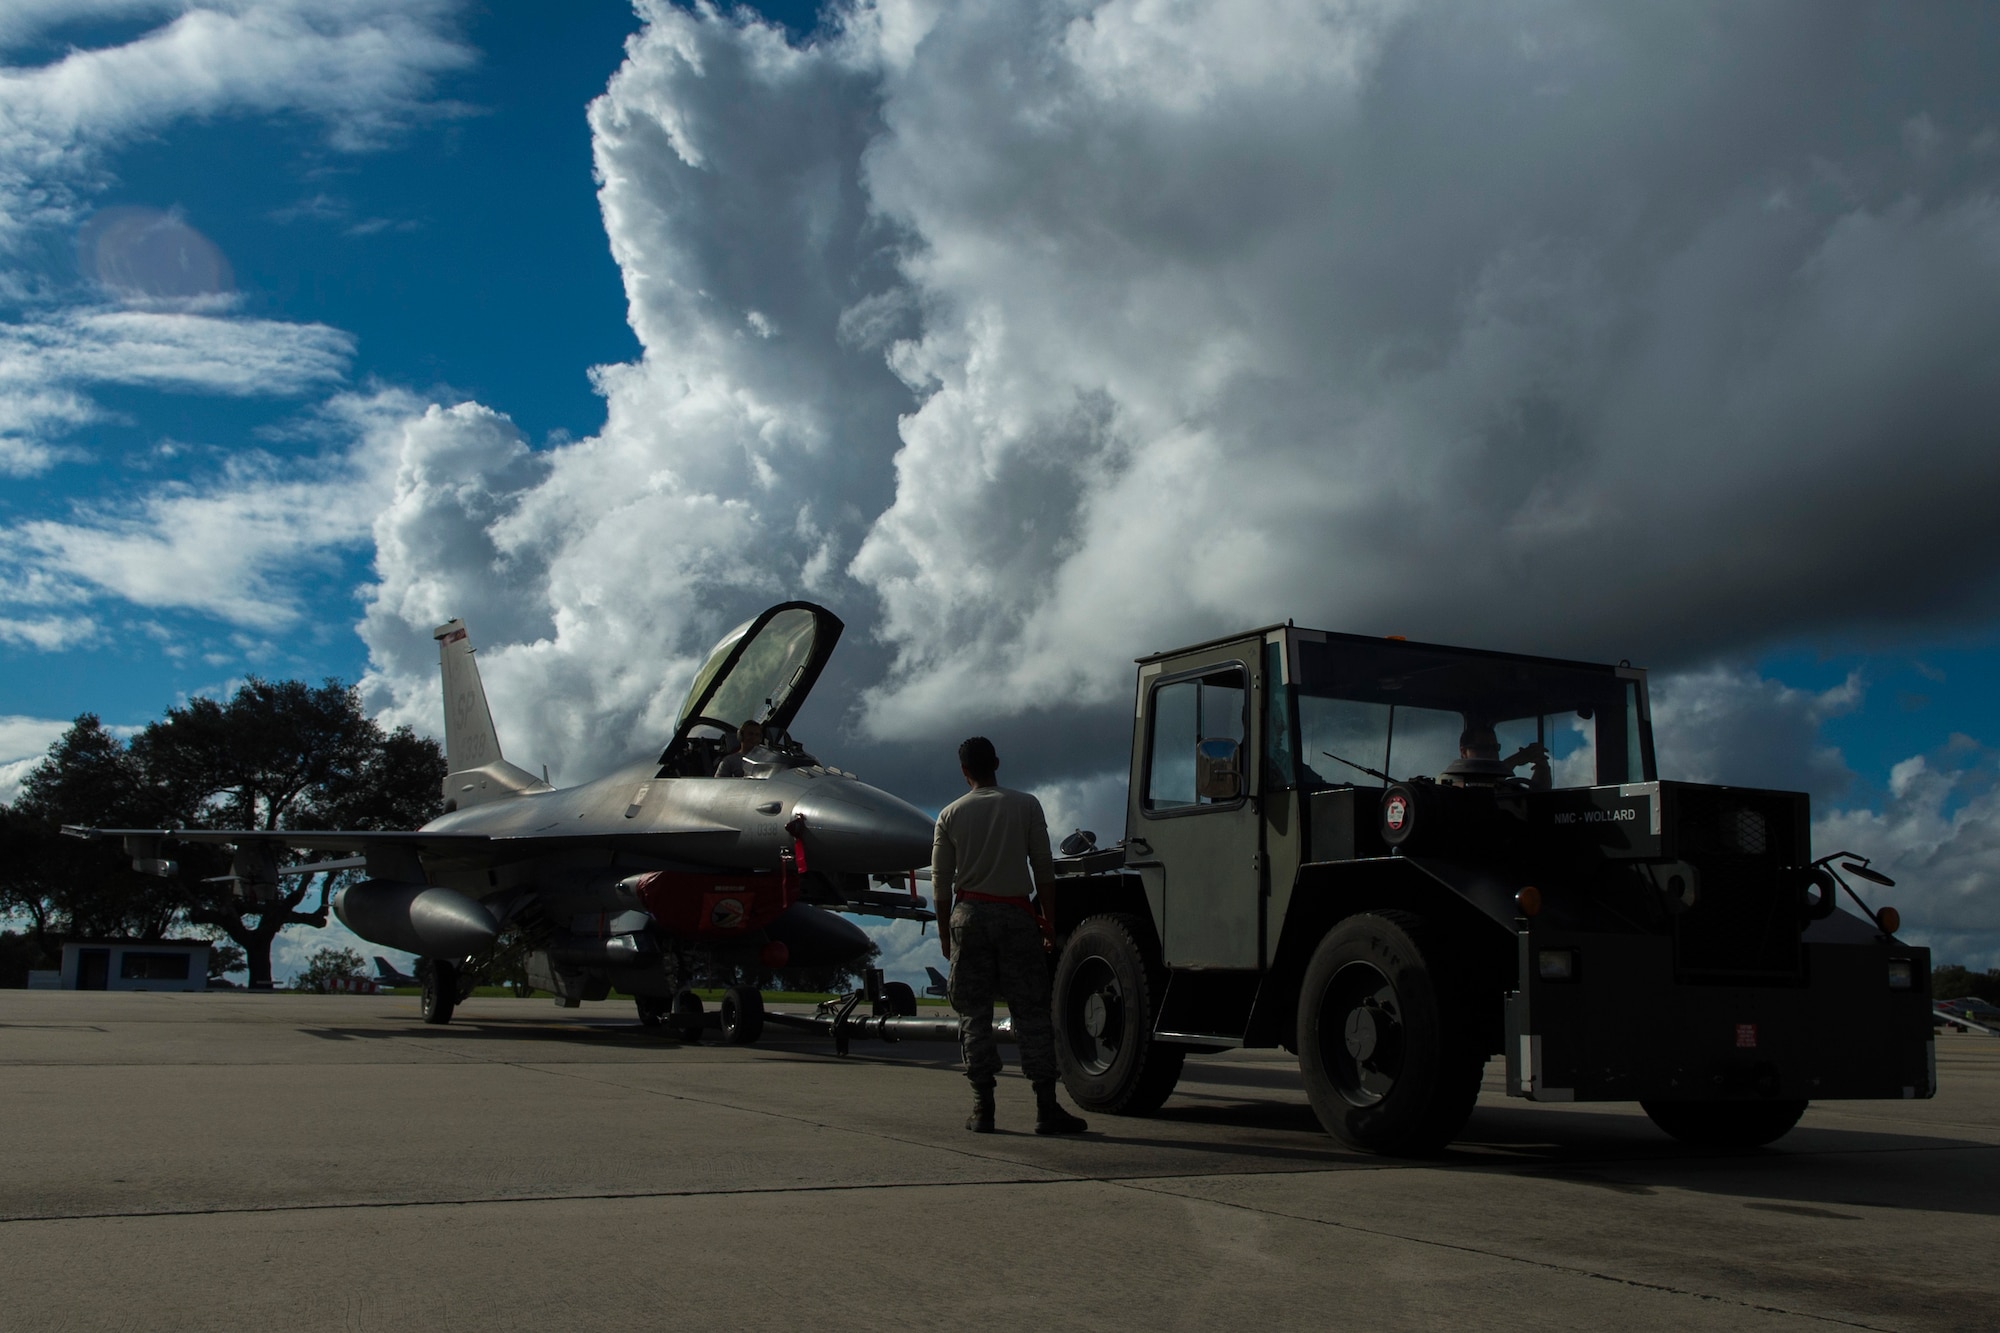 BEJA AIR BASE, Portugal – Members of the 52nd Maintenance Group prepare to tow an F-16 Fighting Falcon fighter aircraft, assigned to the 480th Fighter Squadron at Spangdahlem Air Base, Germany, during Trident Juncture 2015 at Beja Air Base, Portugal, Oct. 27, 2015. More than 100 Airmen assigned to the 52nd Maintenance Group deployed to Portugal in support of Trident Juncture 2015, the largest NATO exercise conducted in the past 20 years. (U.S. Air Force photo by Airman 1st Class Luke Kitterman/Released)